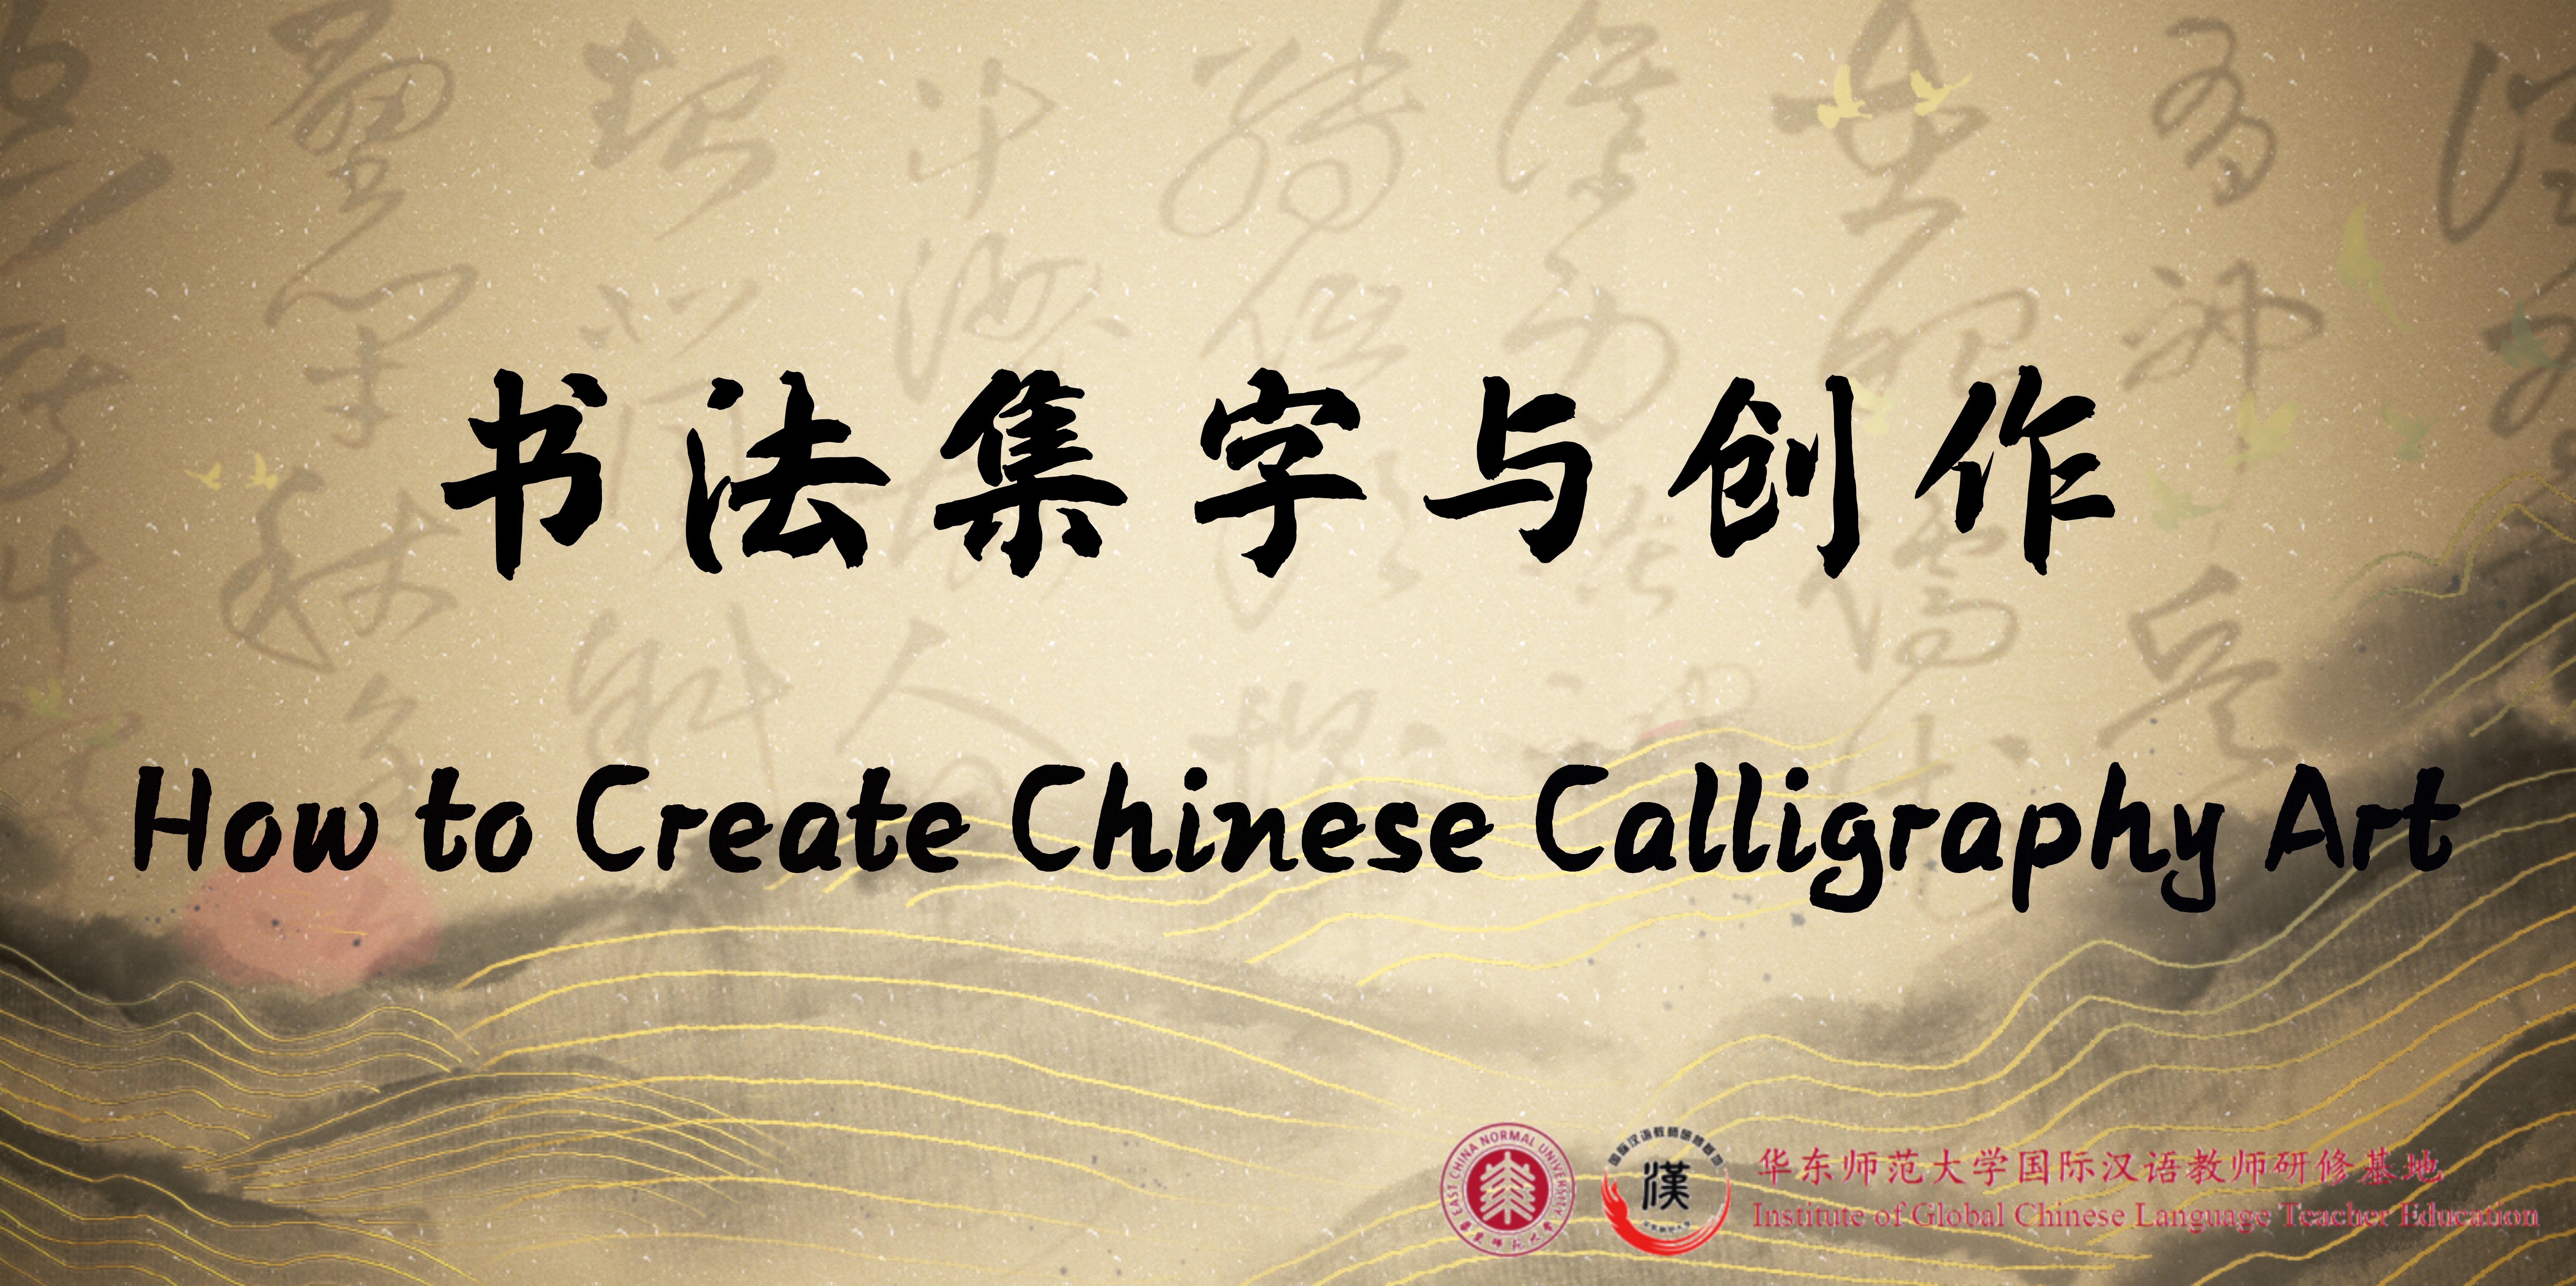 How to Create Chinese Calligraphy Art